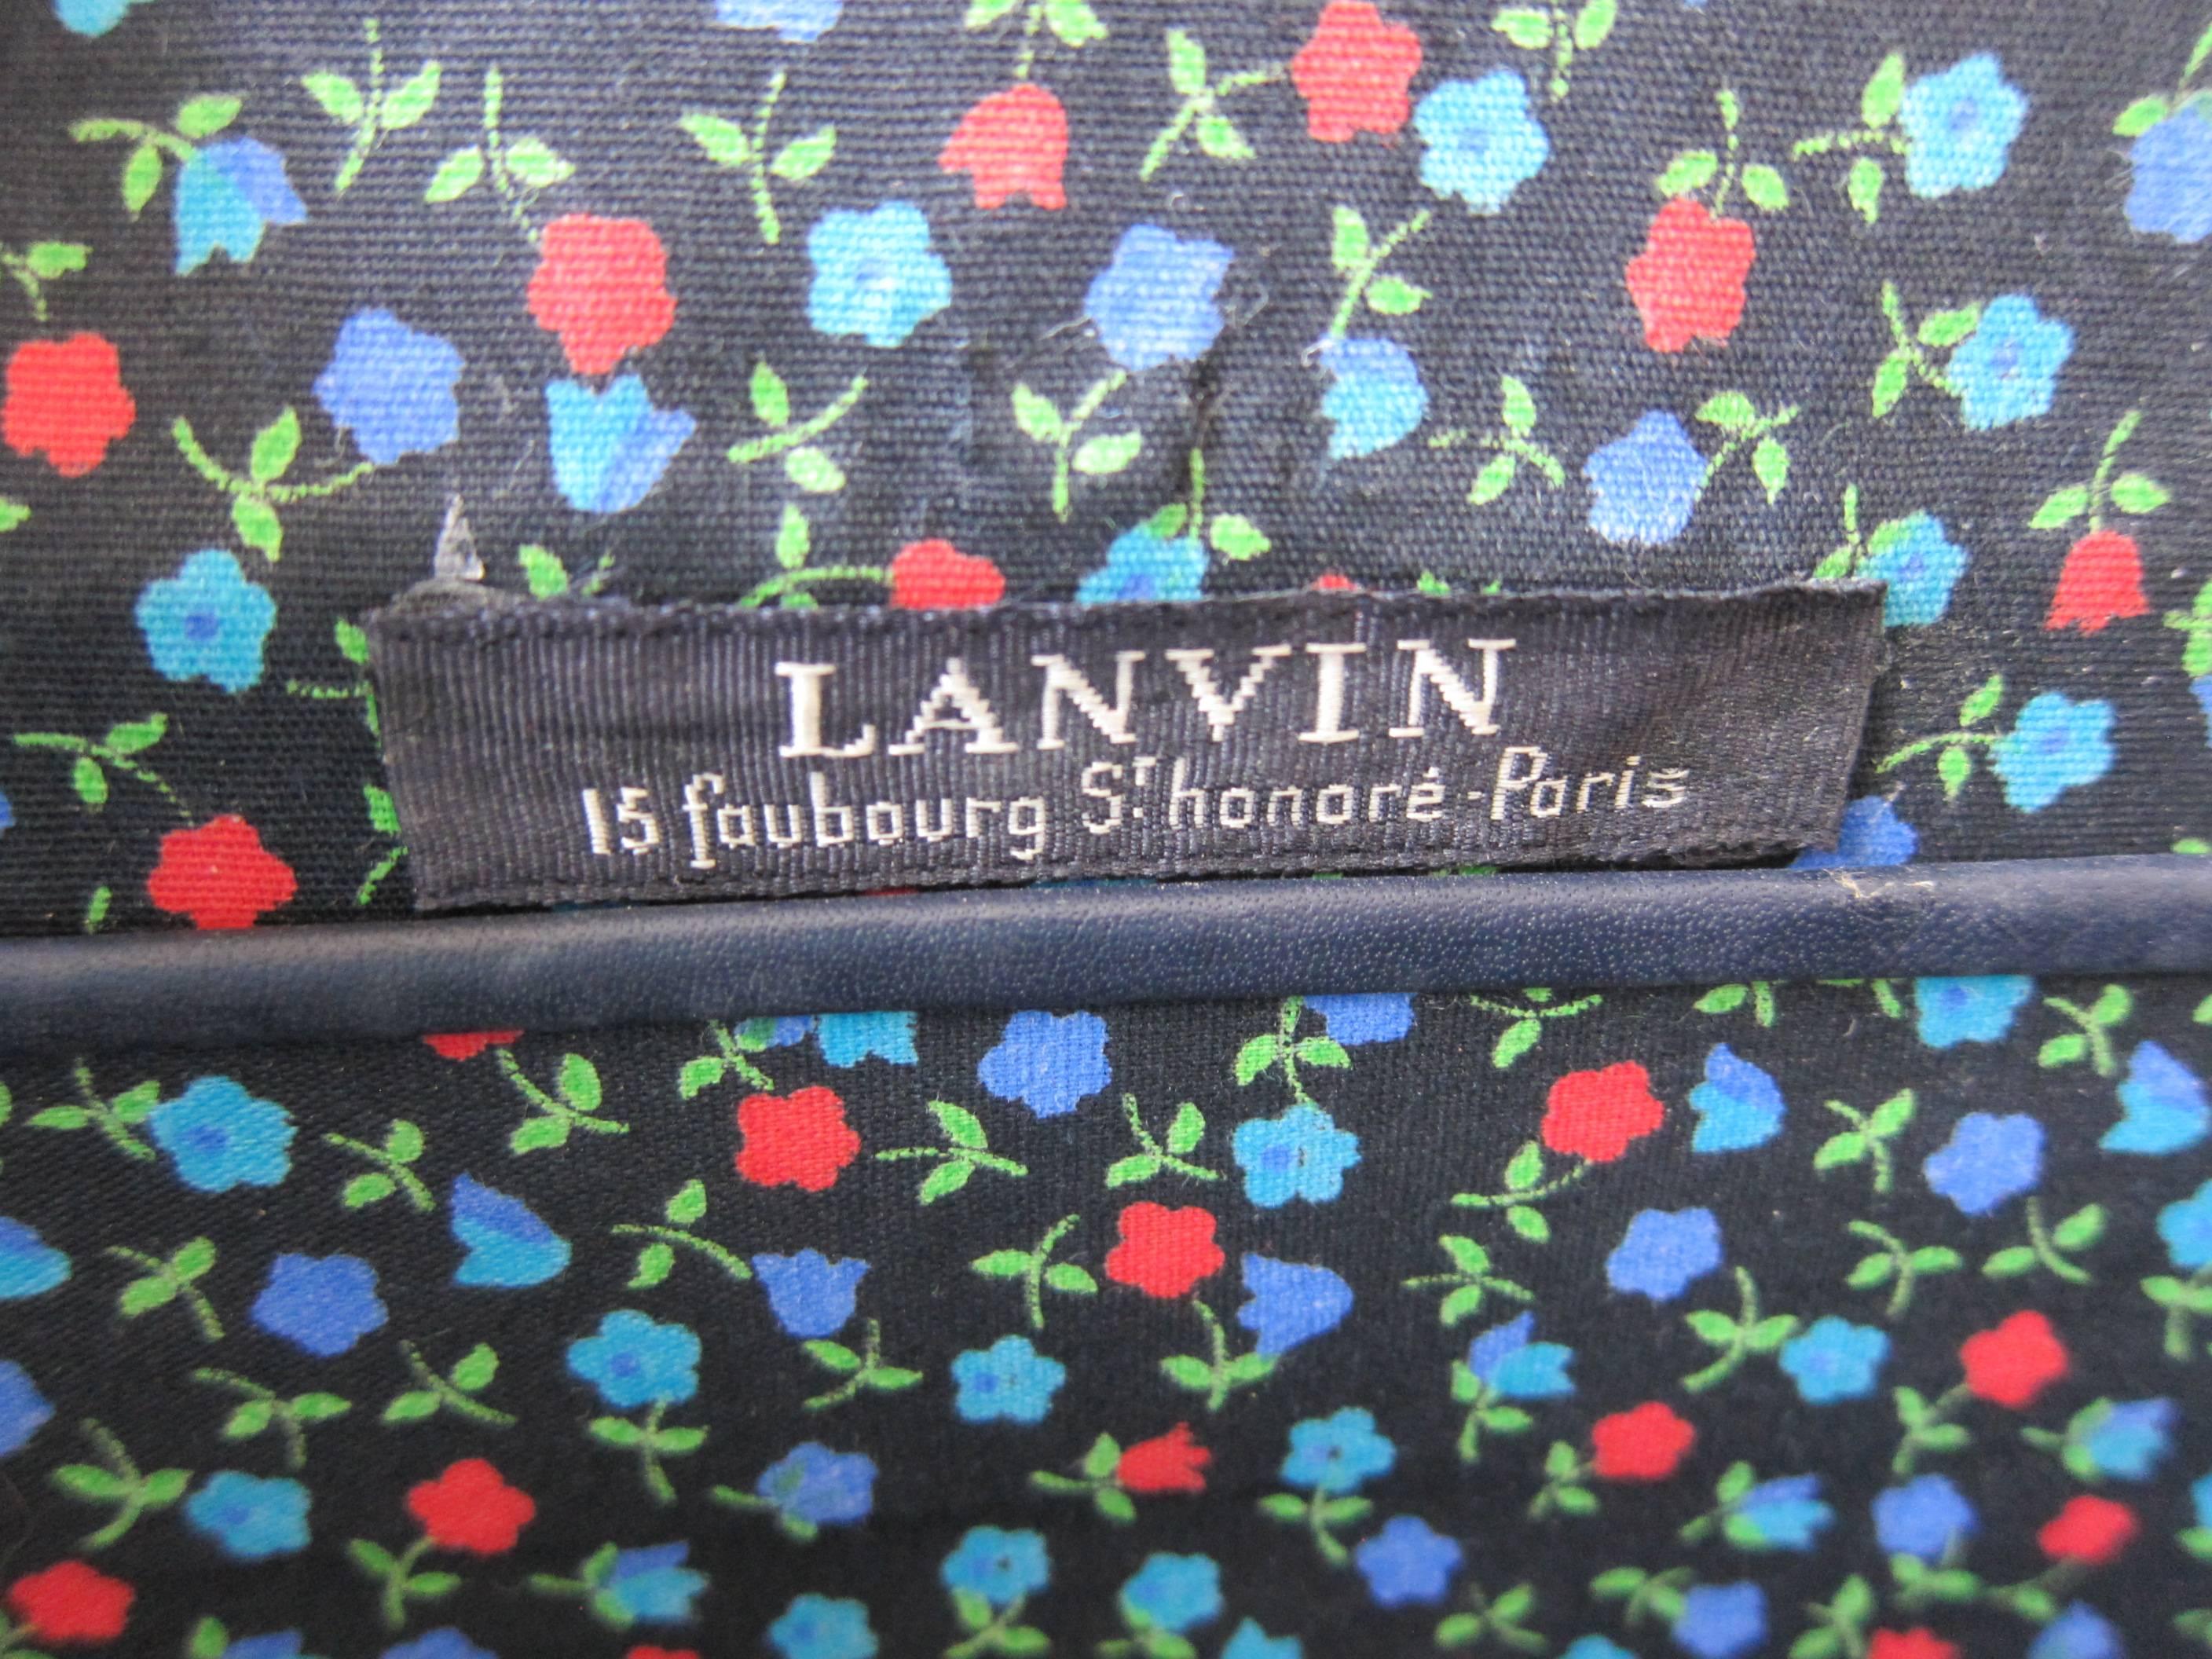 A really Vintage Lanvin bag with 2 flaps.

Removable shoulder strap 
Bag is vintage anbd it has many sign of wear in the corners (quite damages)  and in the leather but it is still in fair condition. Just for collectors or vintage